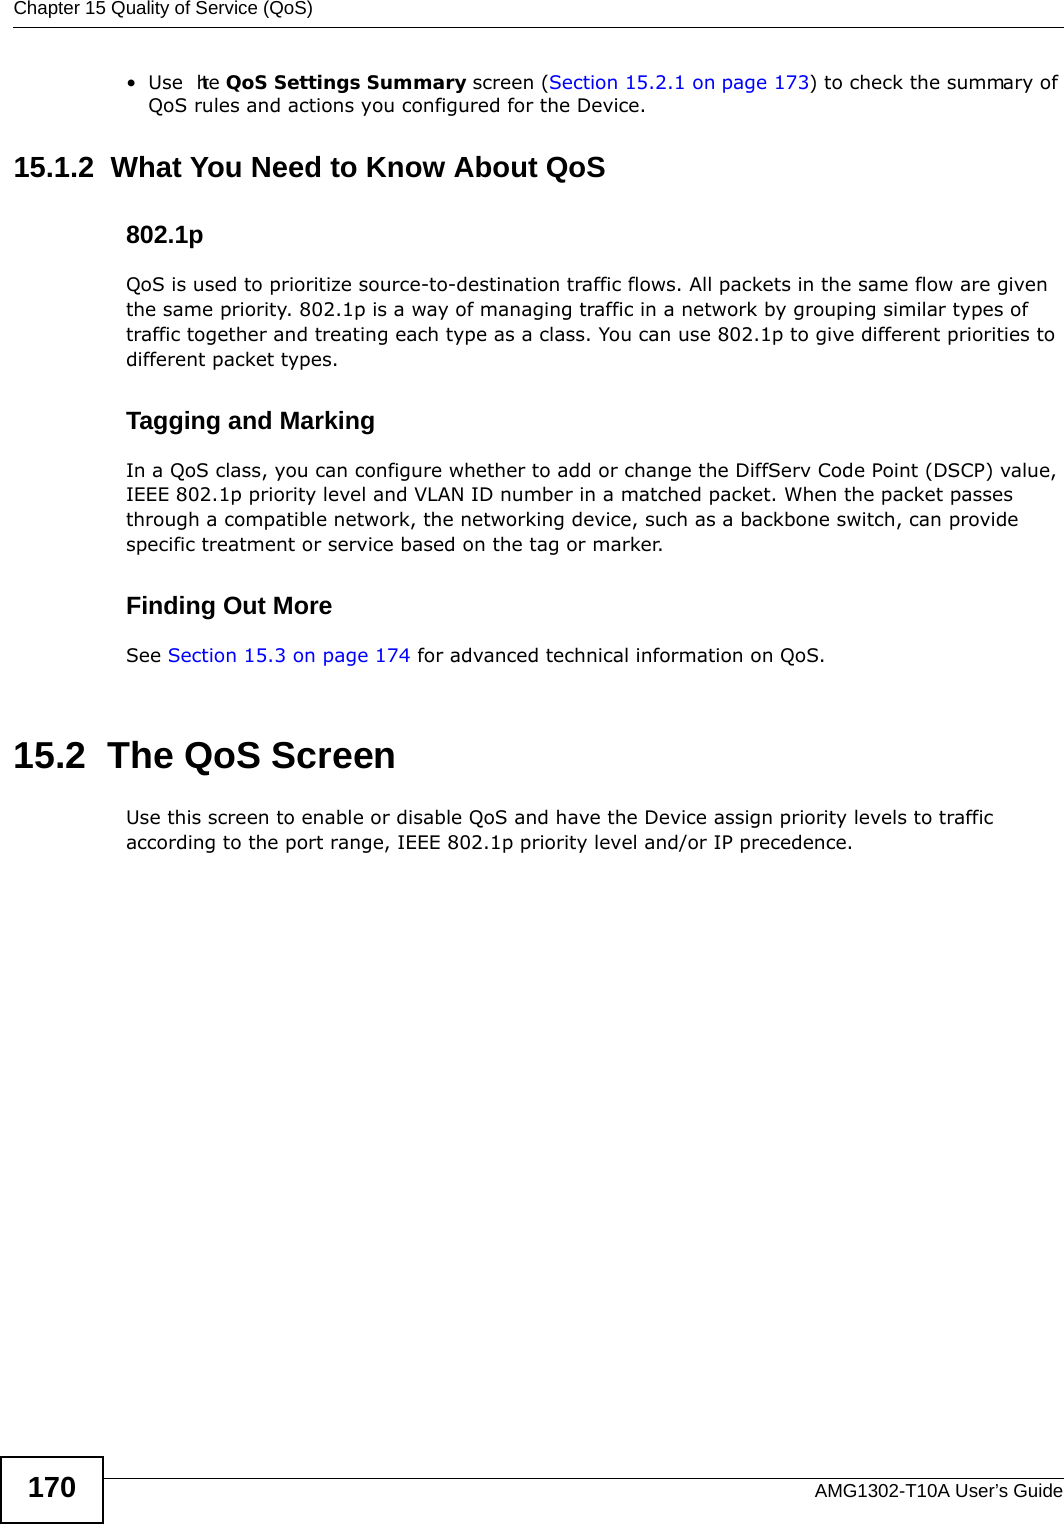 Chapter 15 Quality of Service (QoS)AMG1302-T10A User’s Guide170•Use  the QoS Settings Summary screen (Section 15.2.1 on page 173) to check the summary of QoS rules and actions you configured for the Device.15.1.2  What You Need to Know About QoS802.1pQoS is used to prioritize source-to-destination traffic flows. All packets in the same flow are given the same priority. 802.1p is a way of managing traffic in a network by grouping similar types of traffic together and treating each type as a class. You can use 802.1p to give different priorities to different packet types. Tagging and MarkingIn a QoS class, you can configure whether to add or change the DiffServ Code Point (DSCP) value, IEEE 802.1p priority level and VLAN ID number in a matched packet. When the packet passes through a compatible network, the networking device, such as a backbone switch, can provide specific treatment or service based on the tag or marker.Finding Out MoreSee Section 15.3 on page 174 for advanced technical information on QoS.15.2  The QoS Screen Use this screen to enable or disable QoS and have the Device assign priority levels to traffic according to the port range, IEEE 802.1p priority level and/or IP precedence.